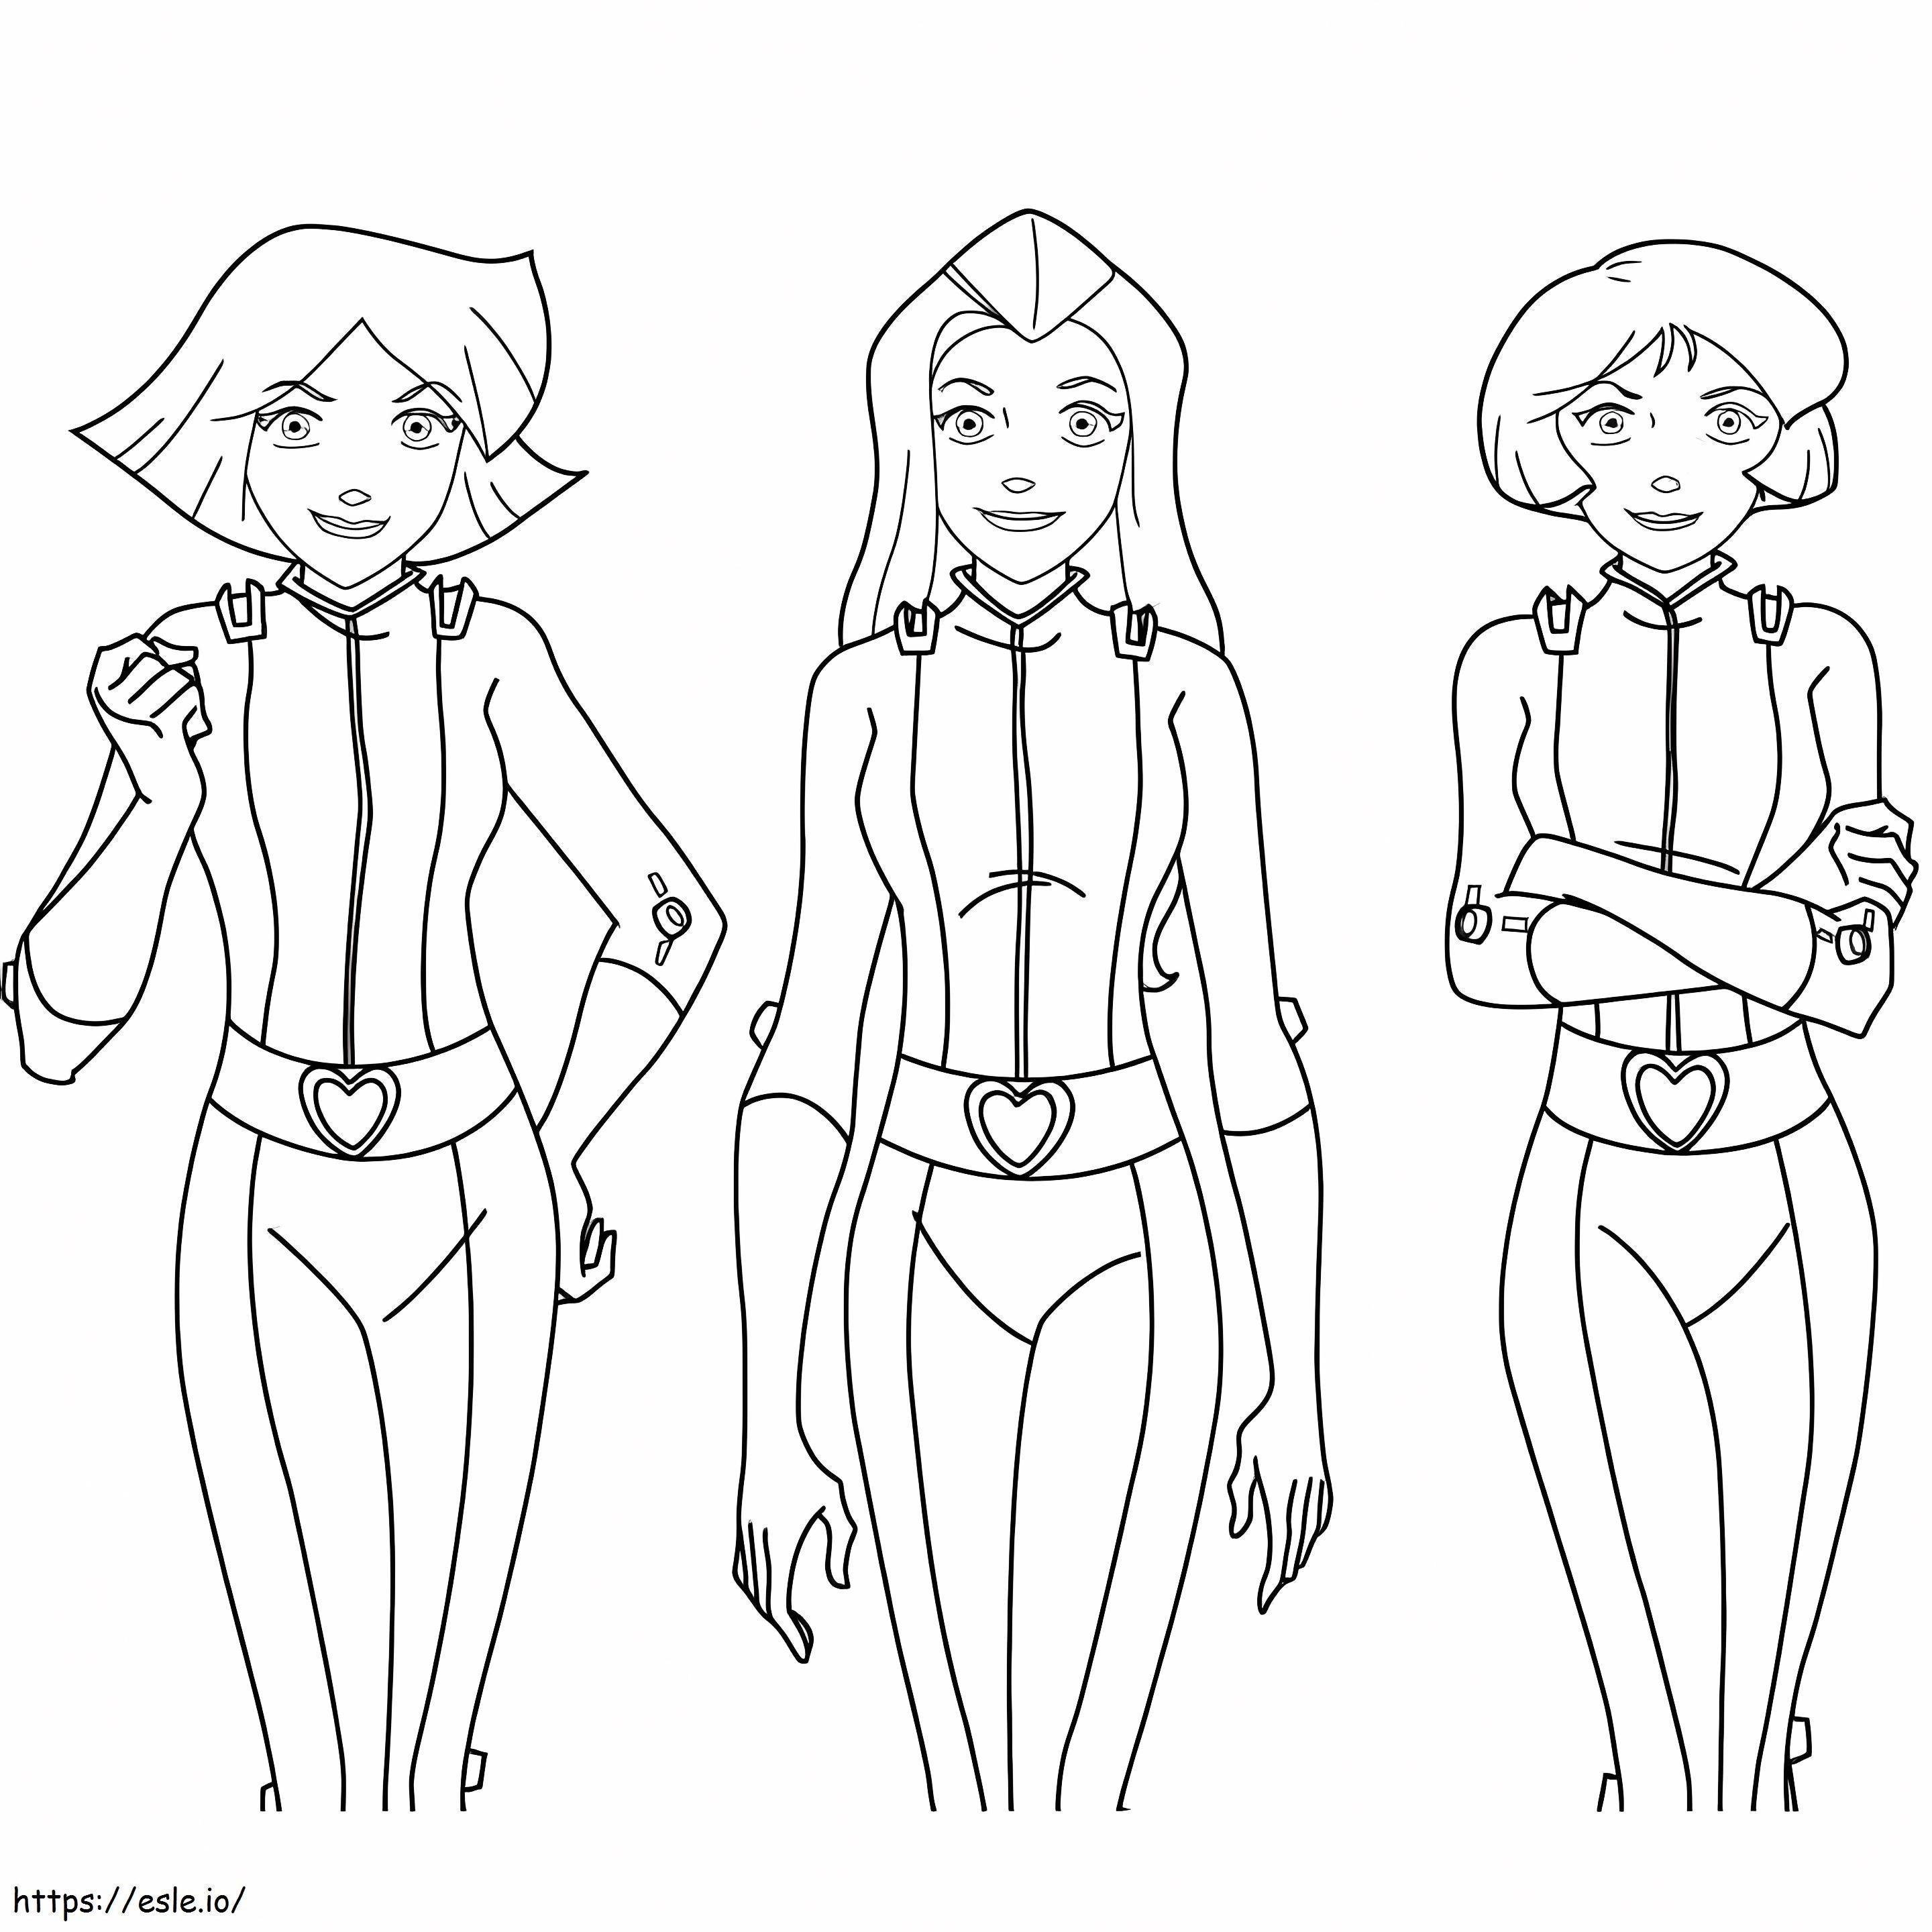 Totally Spies 9 coloring page